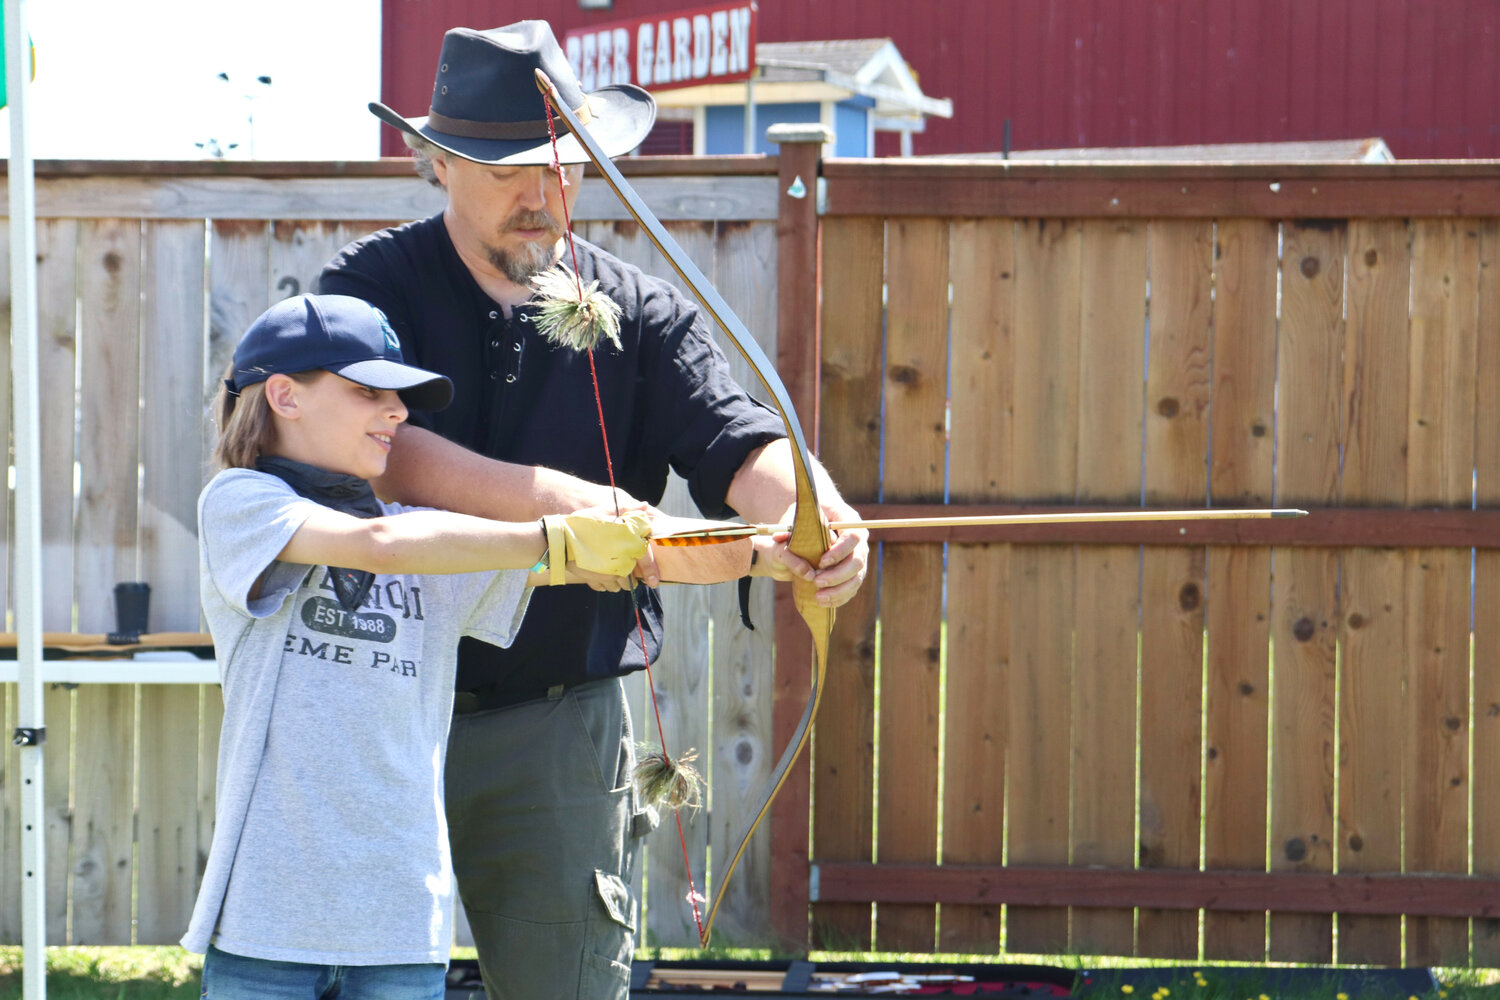 Gunnar McCollum, 10, takes part in an archery demonstration on Saturday, May 27 during the Centralia Fantasy Festival at the Southwest Washington Fairgrounds in Chehalis.